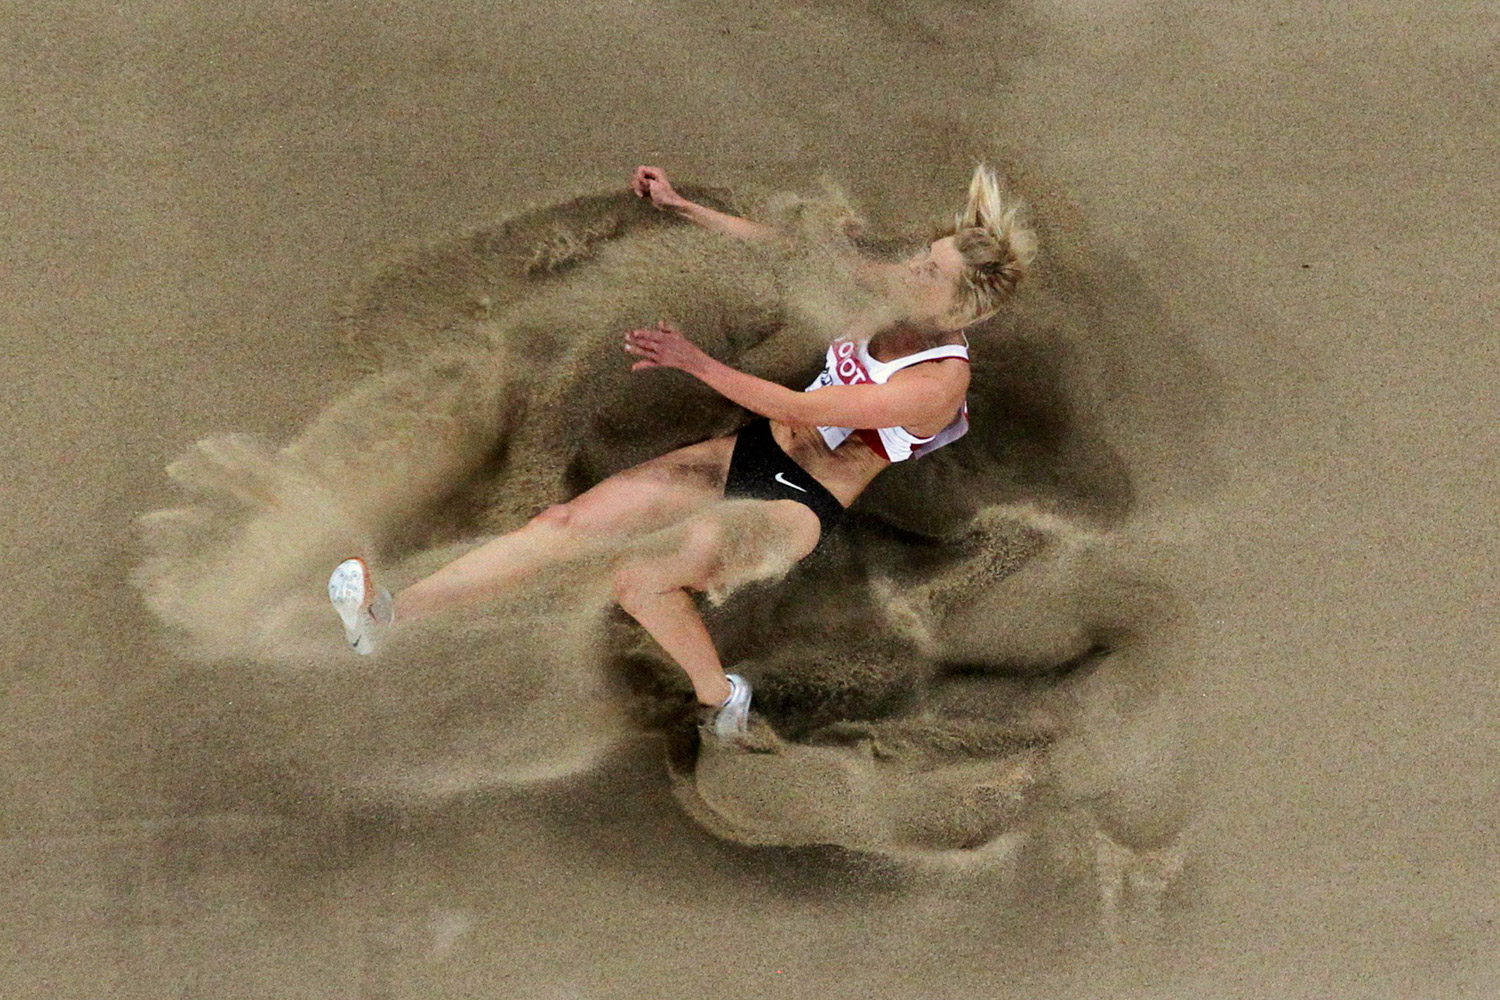 Ineta Radevica of Latvia competes during the women's long jump final at the IAAF World Championships in Daegu, South Korea, August 28, 2011.